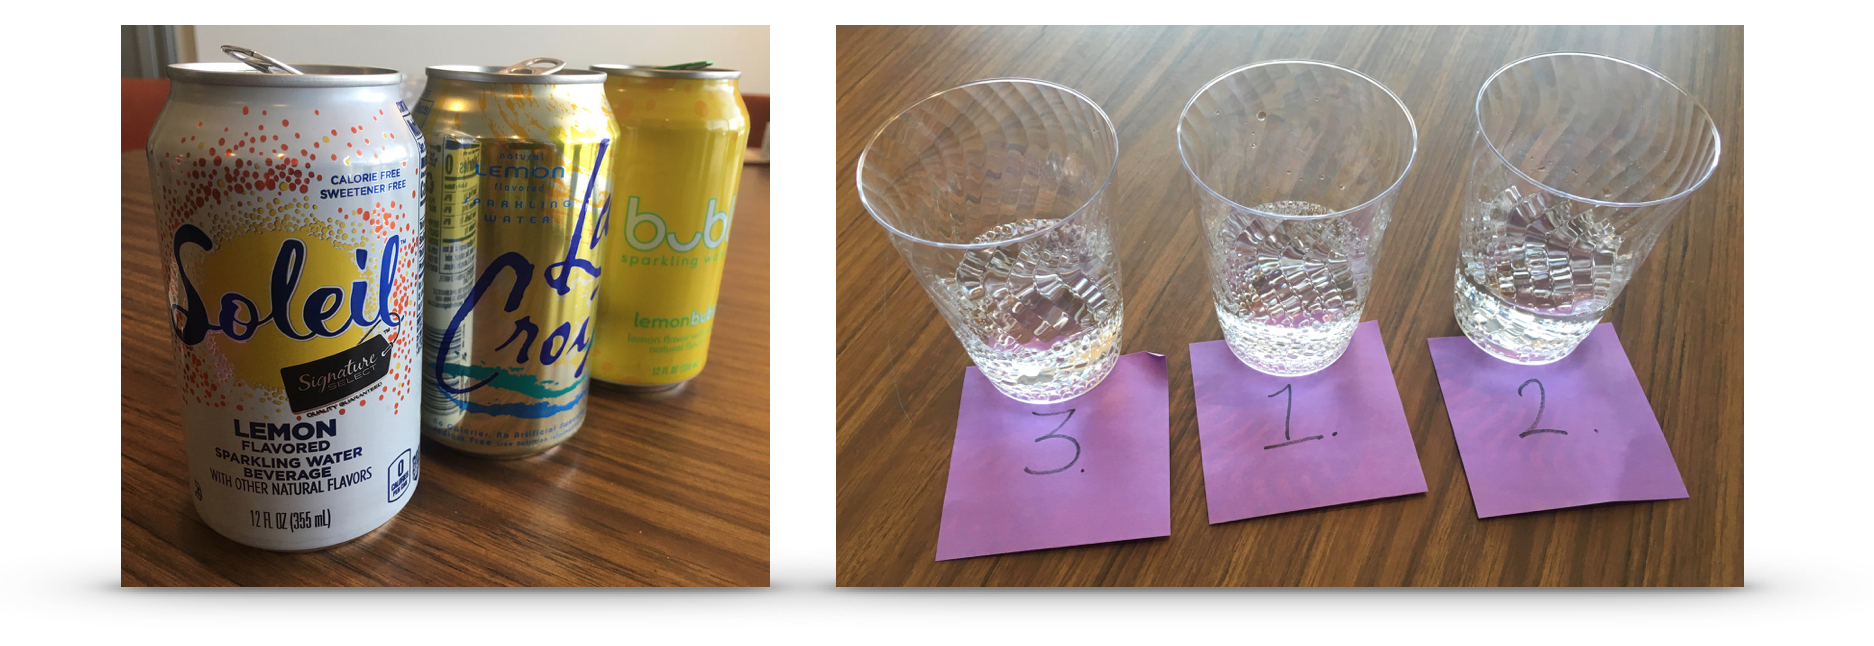 The bubbly water we tested